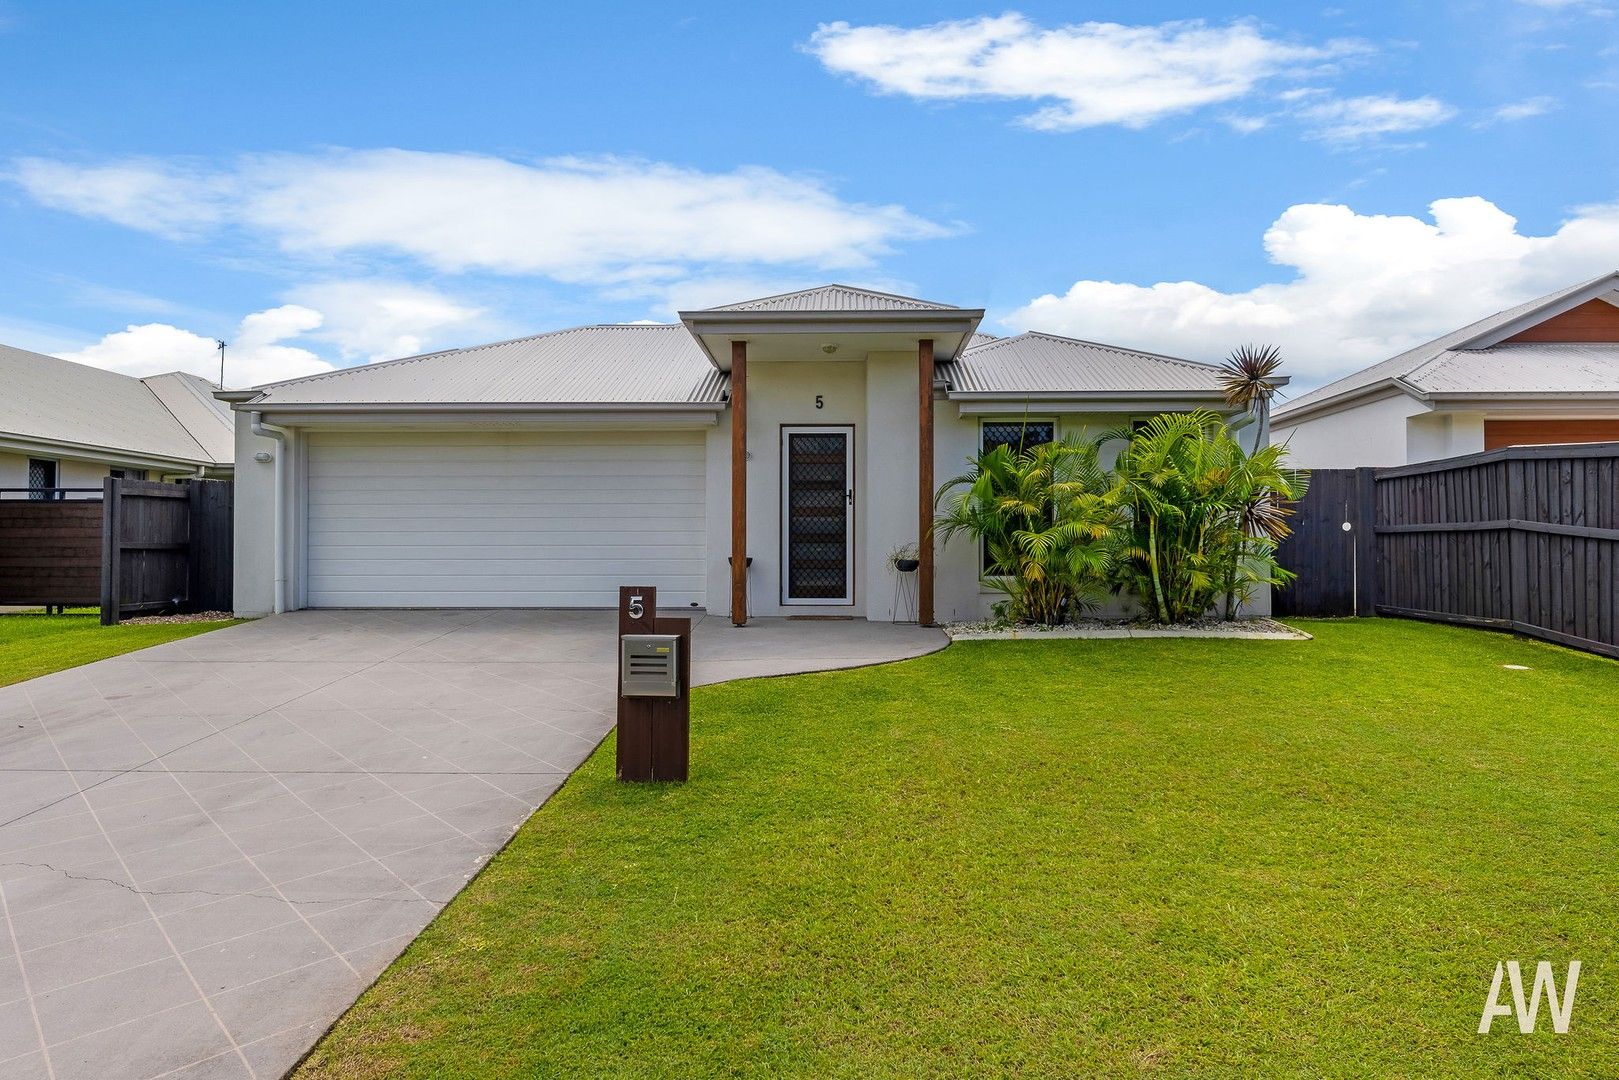 4 bedrooms House in 5 Silvereye Street SIPPY DOWNS QLD, 4556